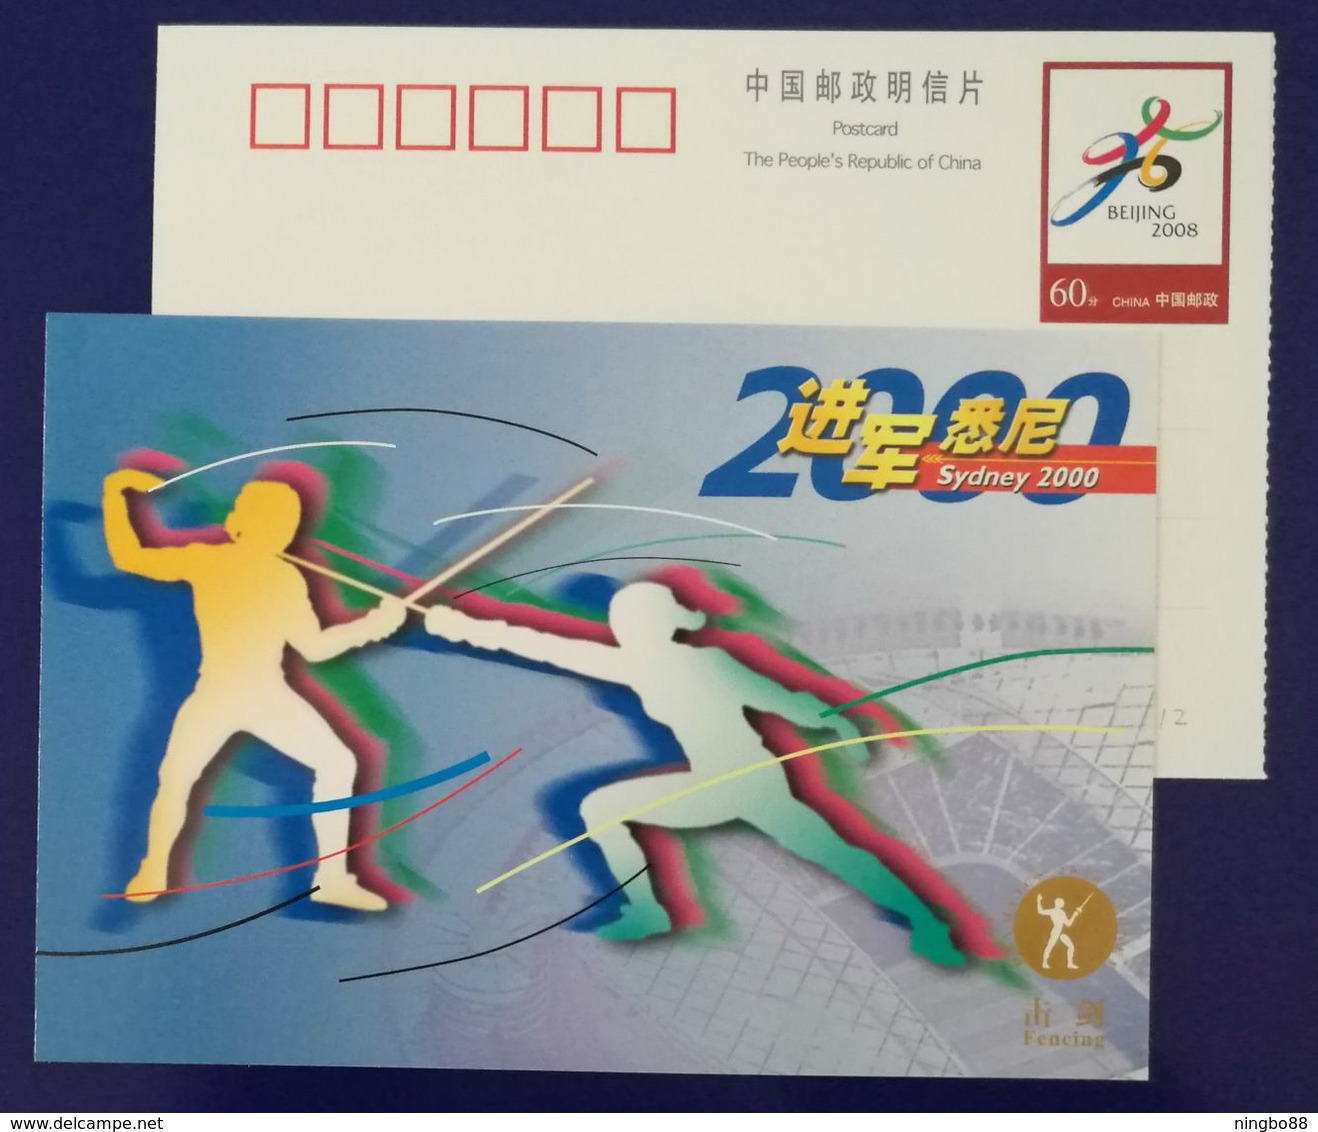 Fencing,China 2000 Sydney Olympic Game Chinese Olympic Team Sport Events Advertising Pre-stamped Card - Fencing